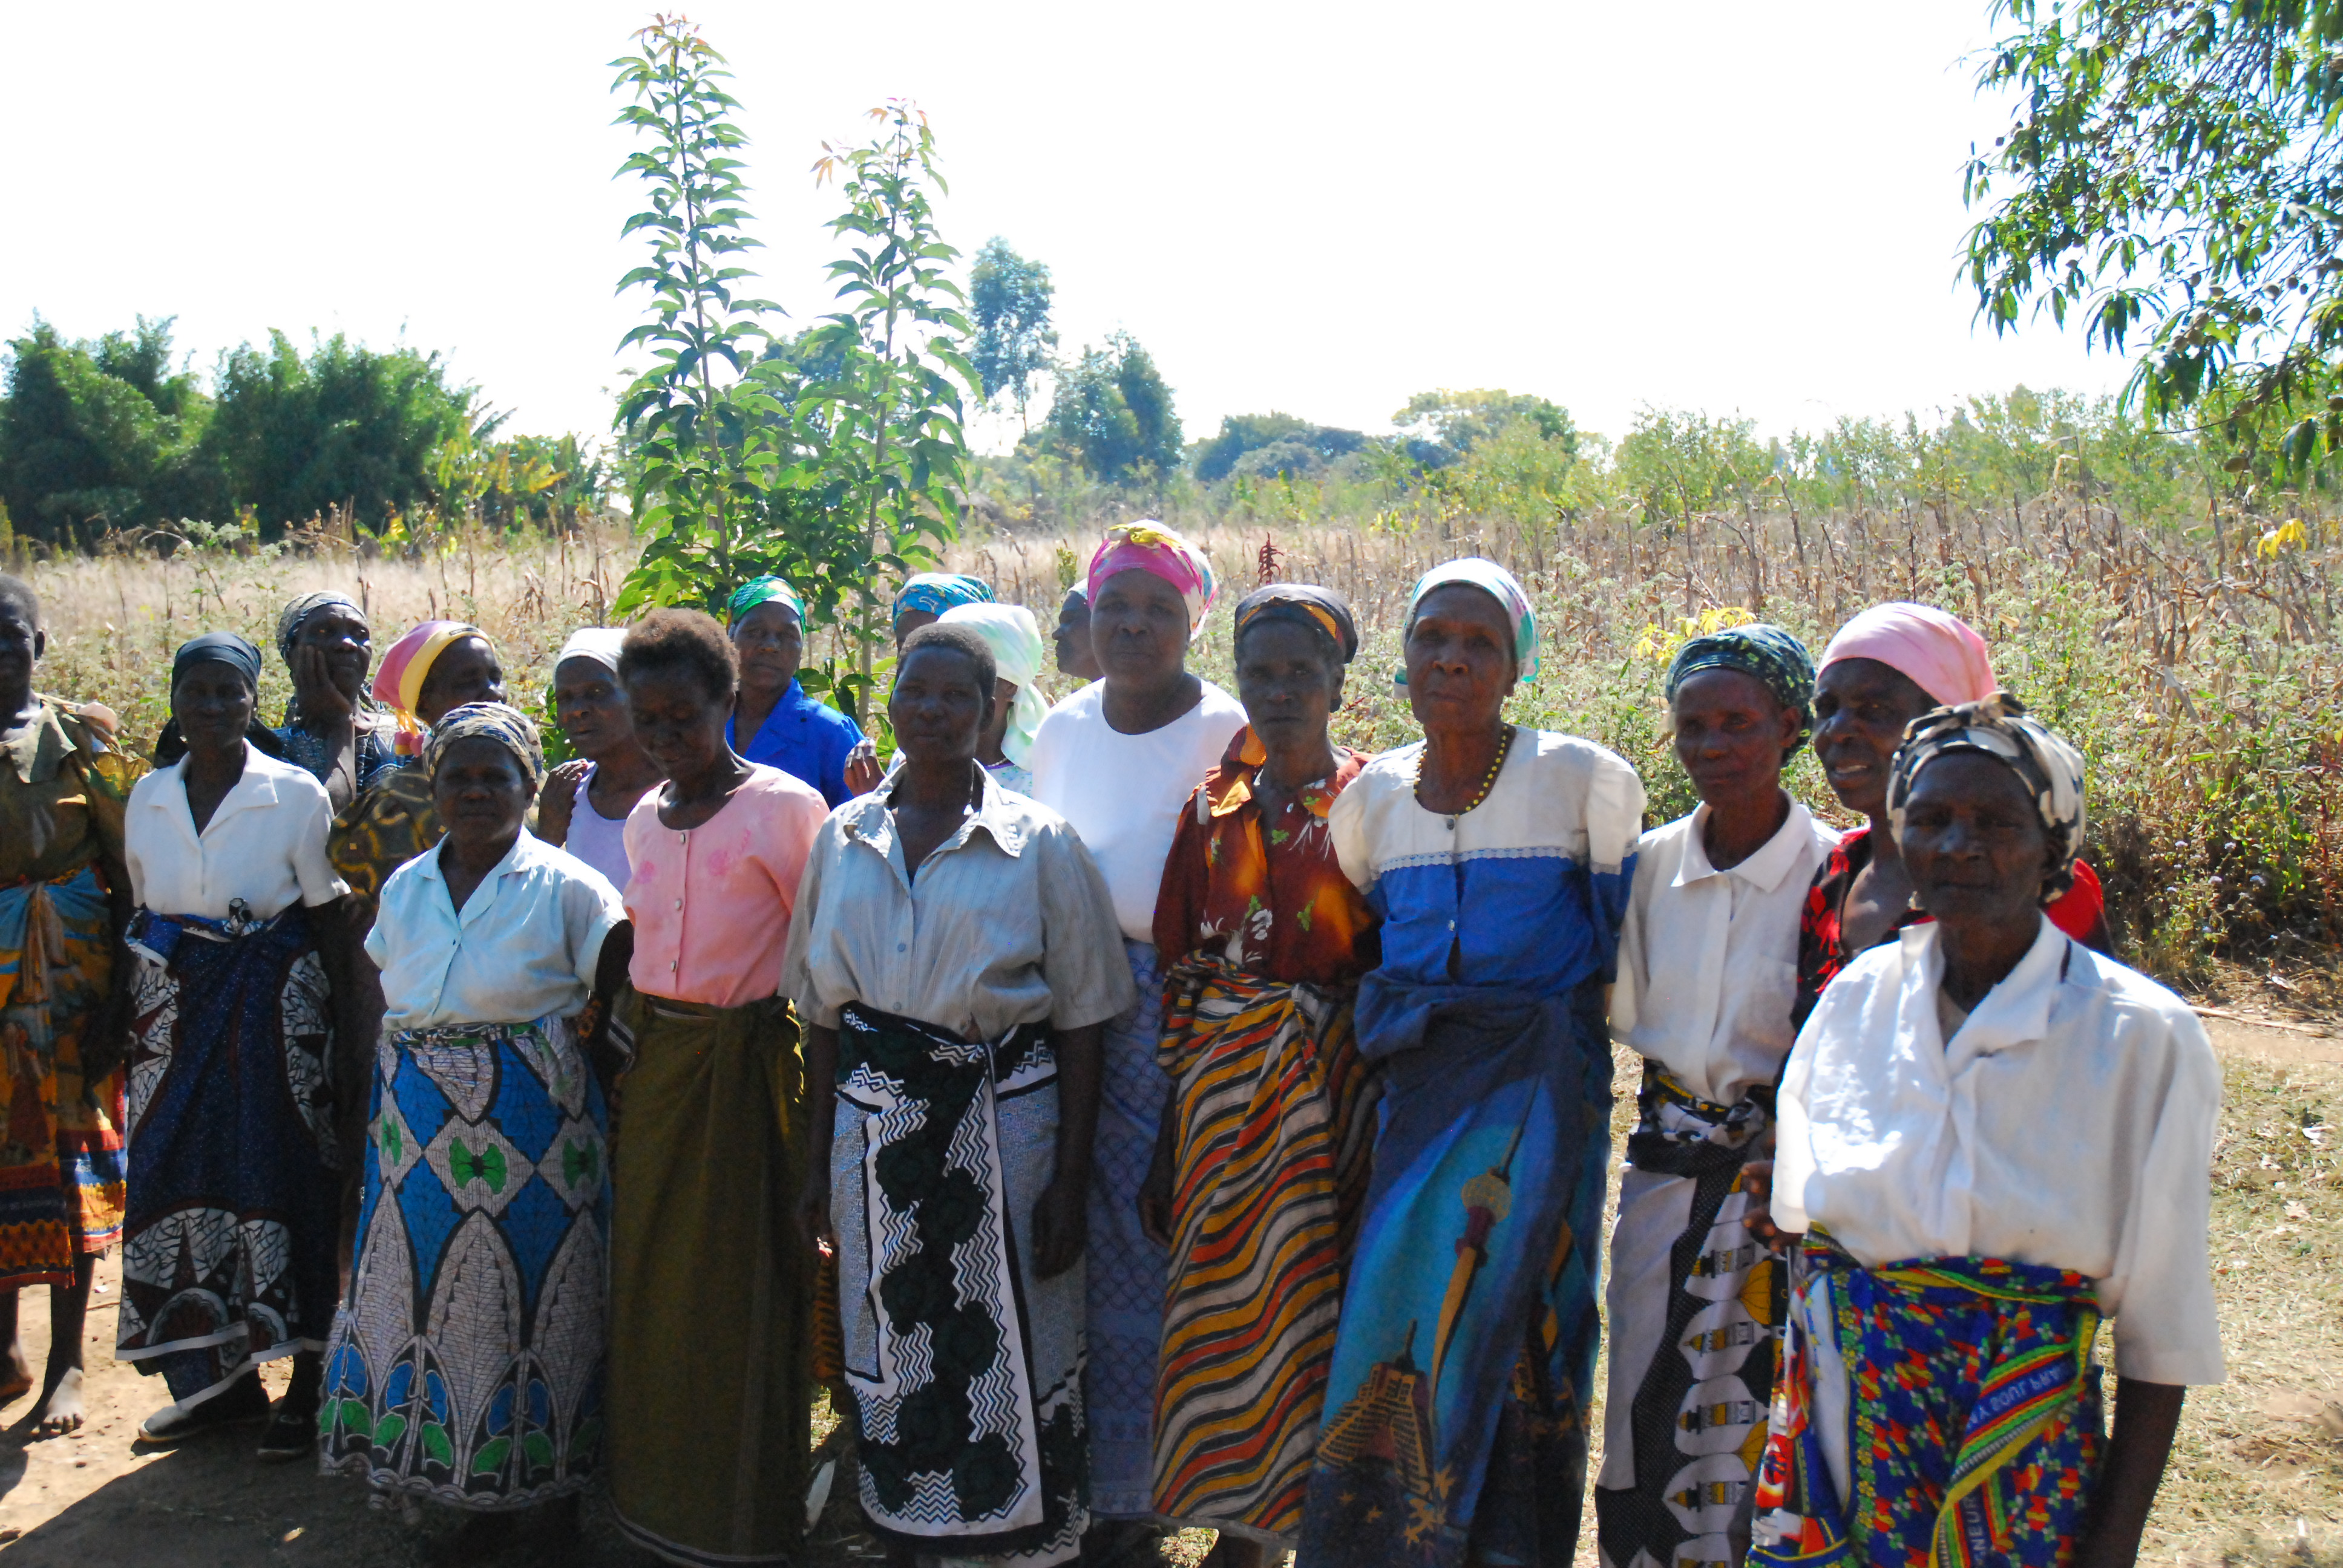 Women farmers in Malawi, credit Katharine Vincent